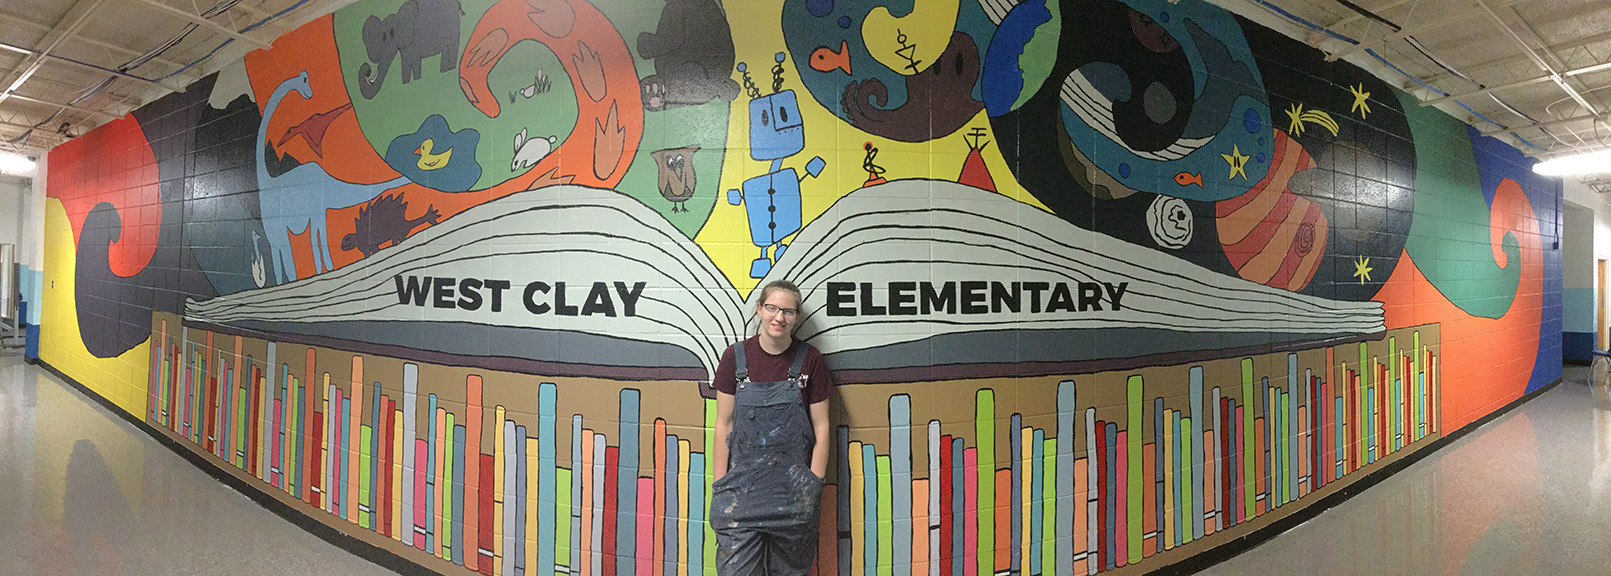 Lauryn Rody, Mississippi State University art major, stands in front of the mural she created for West Clay Elementary School